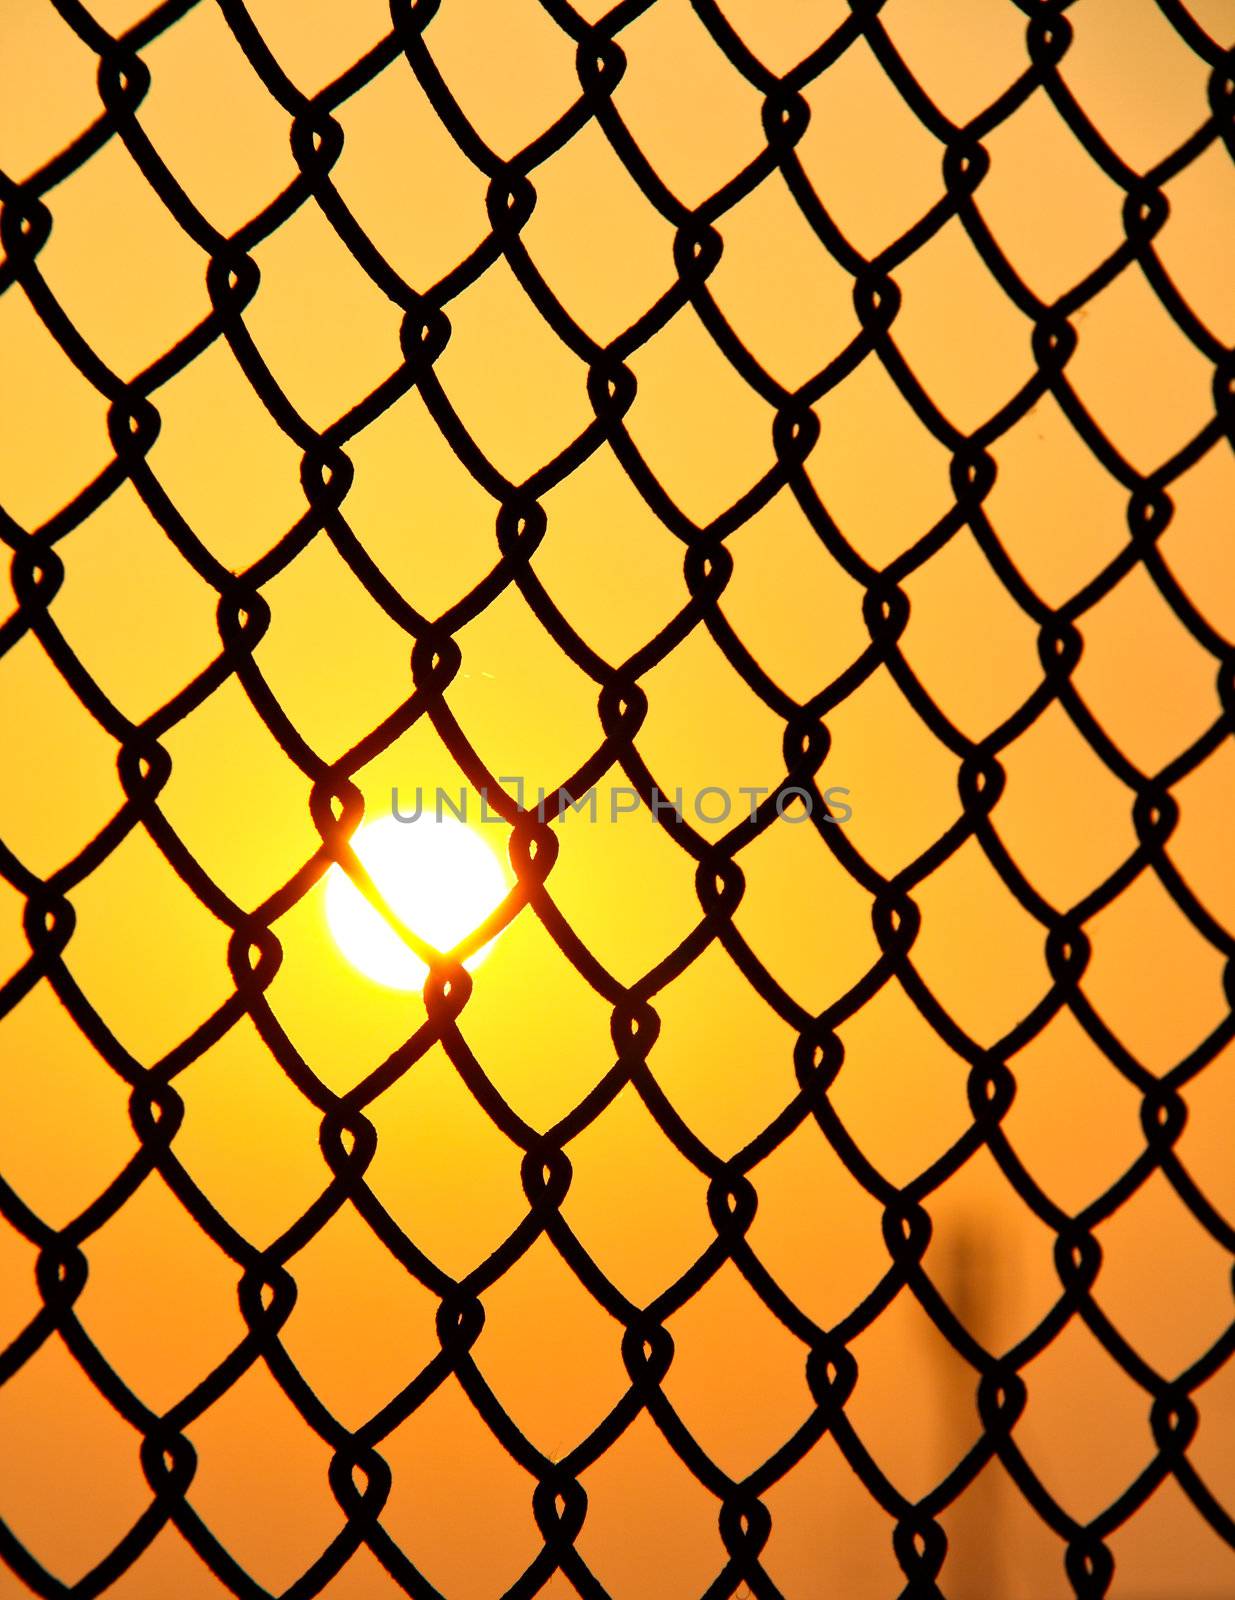 chain link wire fence with sun rise by nuchylee